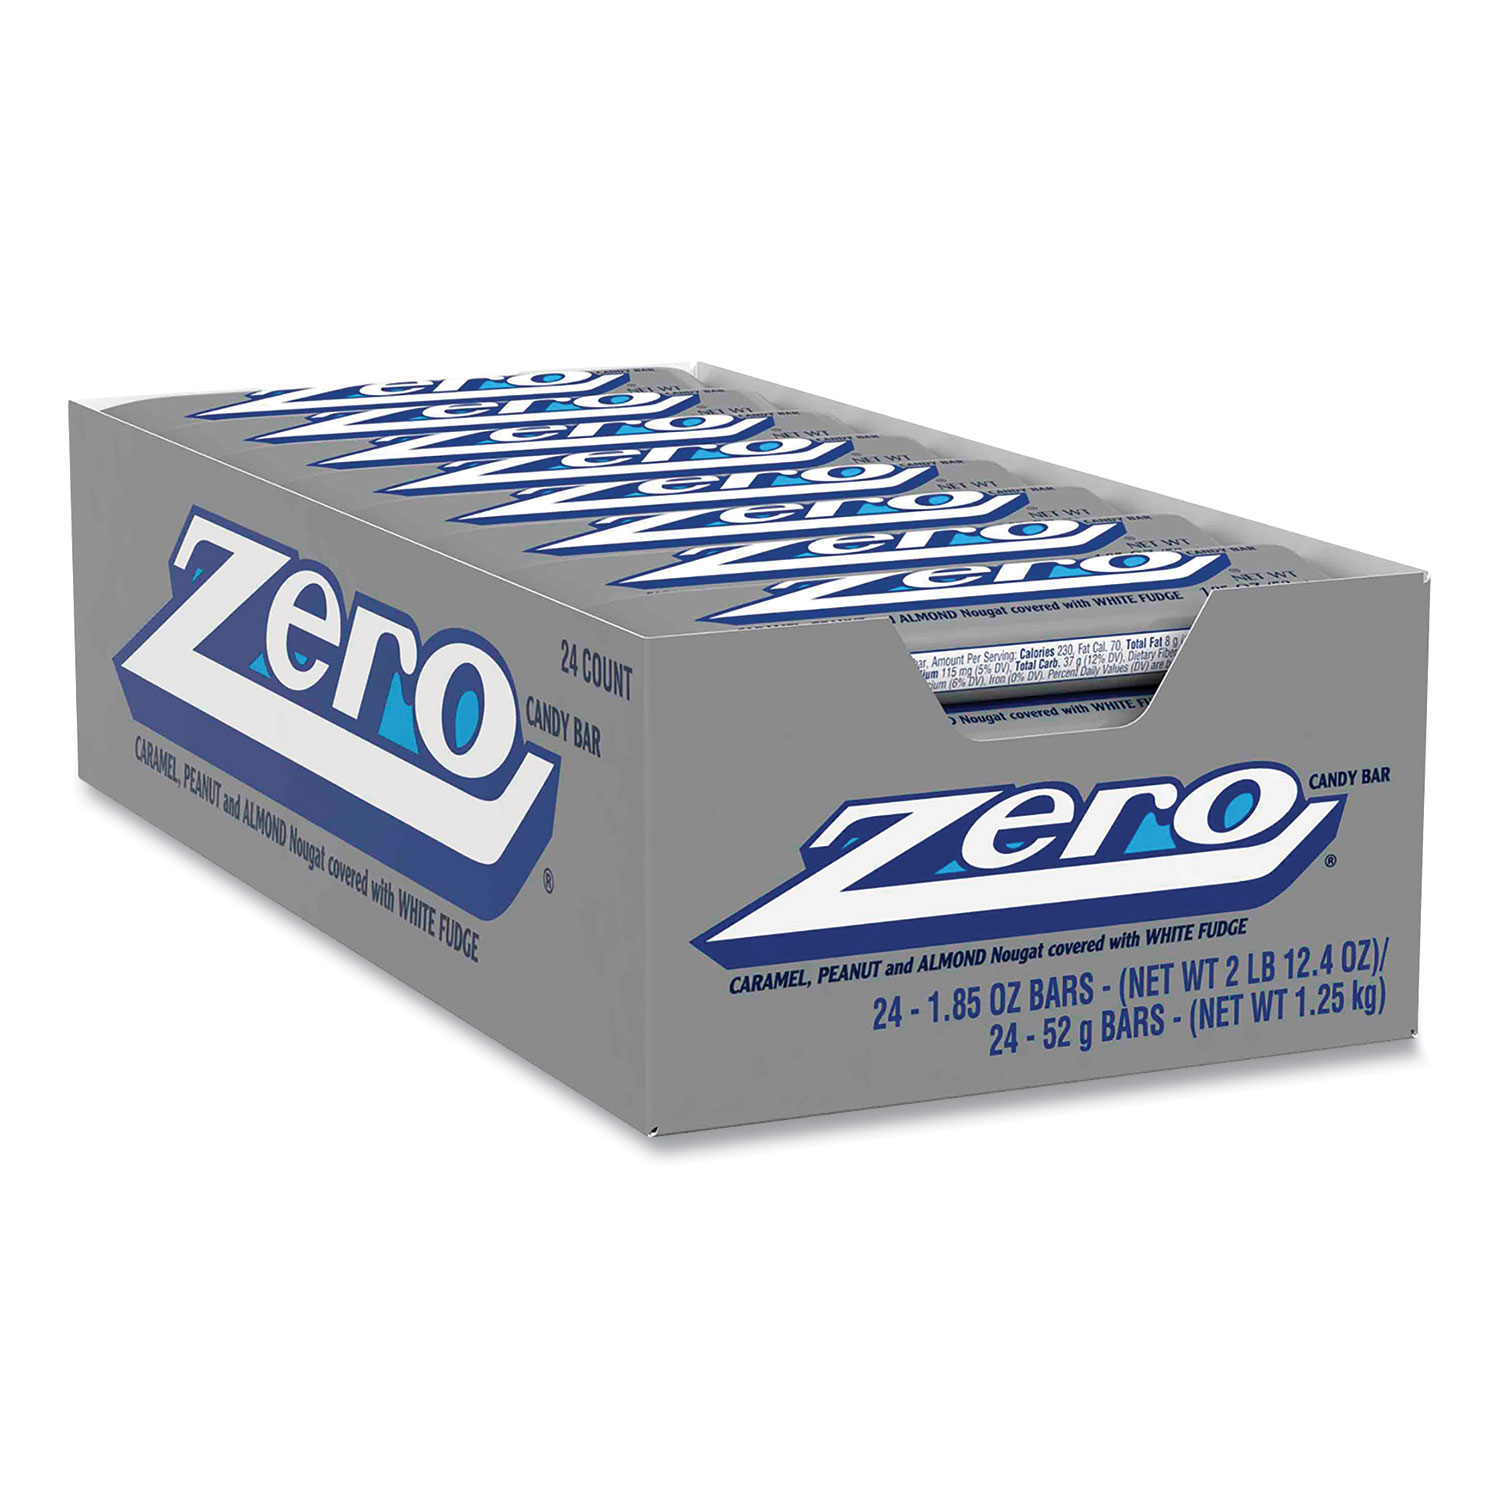  ZERO 80415 Candy Bar, 1.85 oz Bar, 24 Bars/Box, Free Delivery in 1-4 Business Days (GRR24600178) 